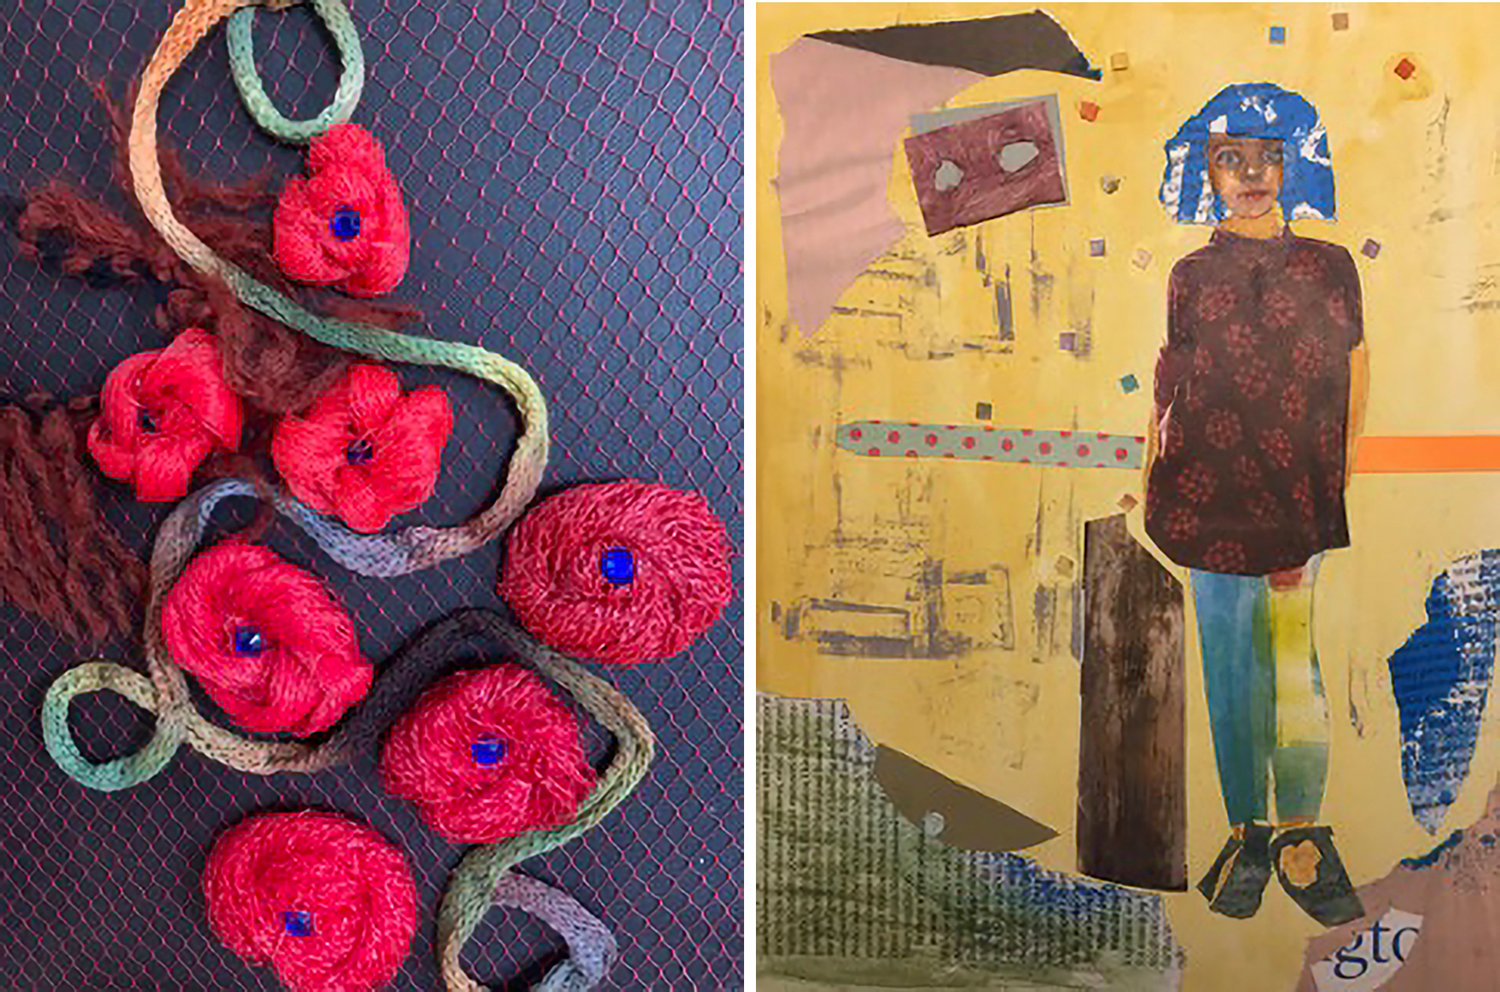 The flowers in ‘Serenity,’ left, are made of non-biodegradable plastic produce nets, created by Diana Catz with materials found around her home. ‘Woman in the Sun, right is a collage by Sharon Krinsky. Both pieces included in the latest virtual exhibition hosted by the Riverdale Art Association, ‘Renewal and Rebirth.’